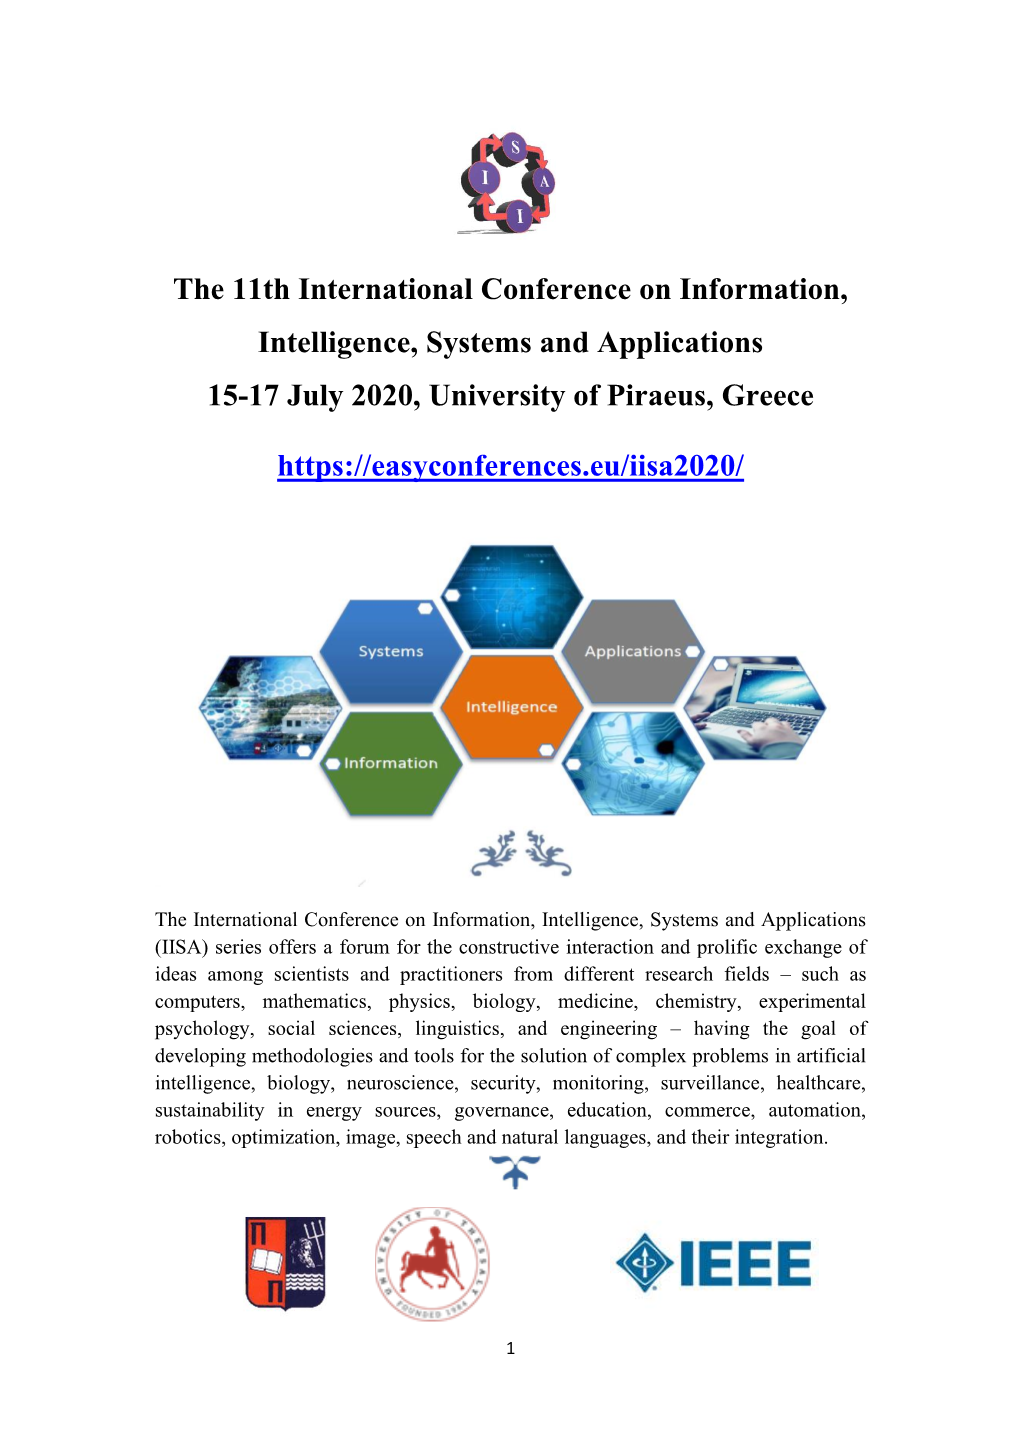 The 11Th International Conference on Information, Intelligence, Systems and Applications 15-17 July 2020, University of Piraeus, Greece